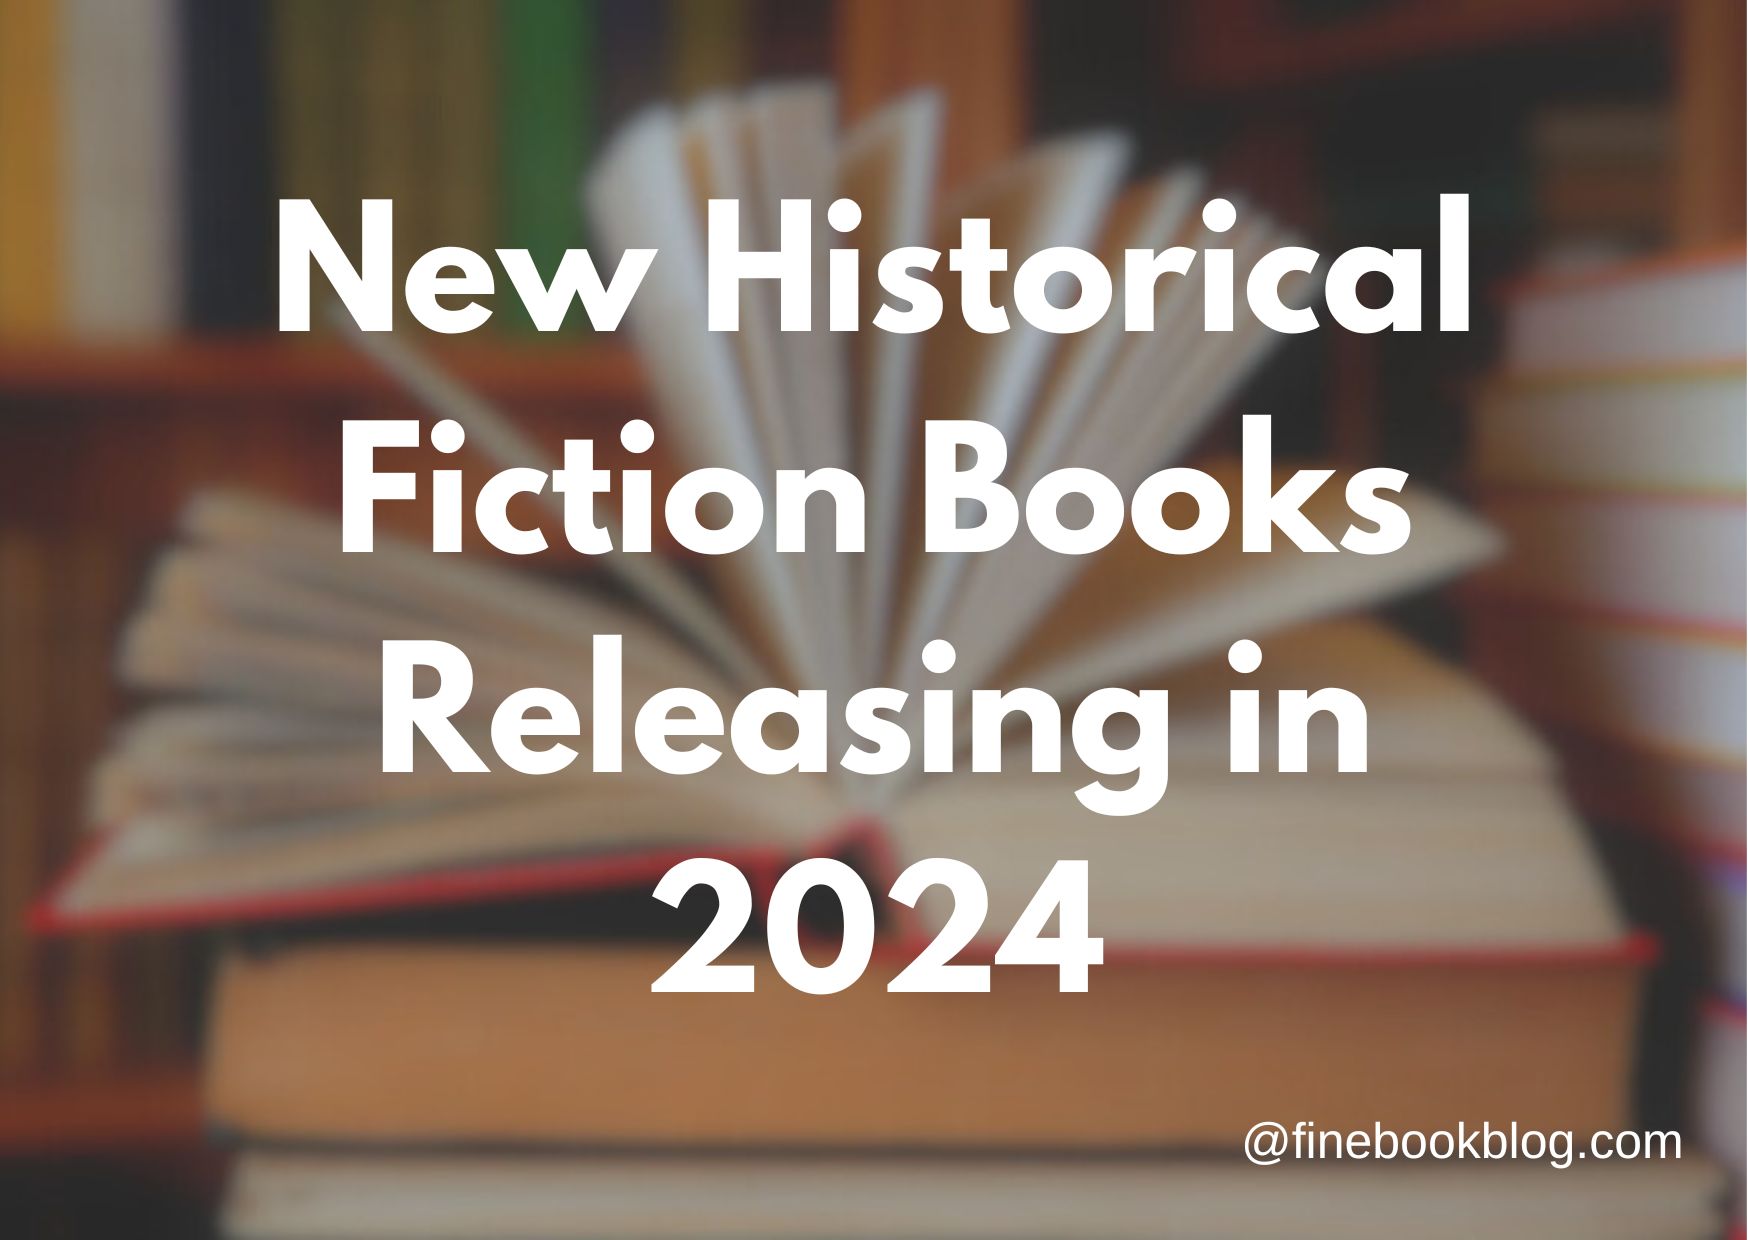 New-book-releases-2024-historical-fiction-books